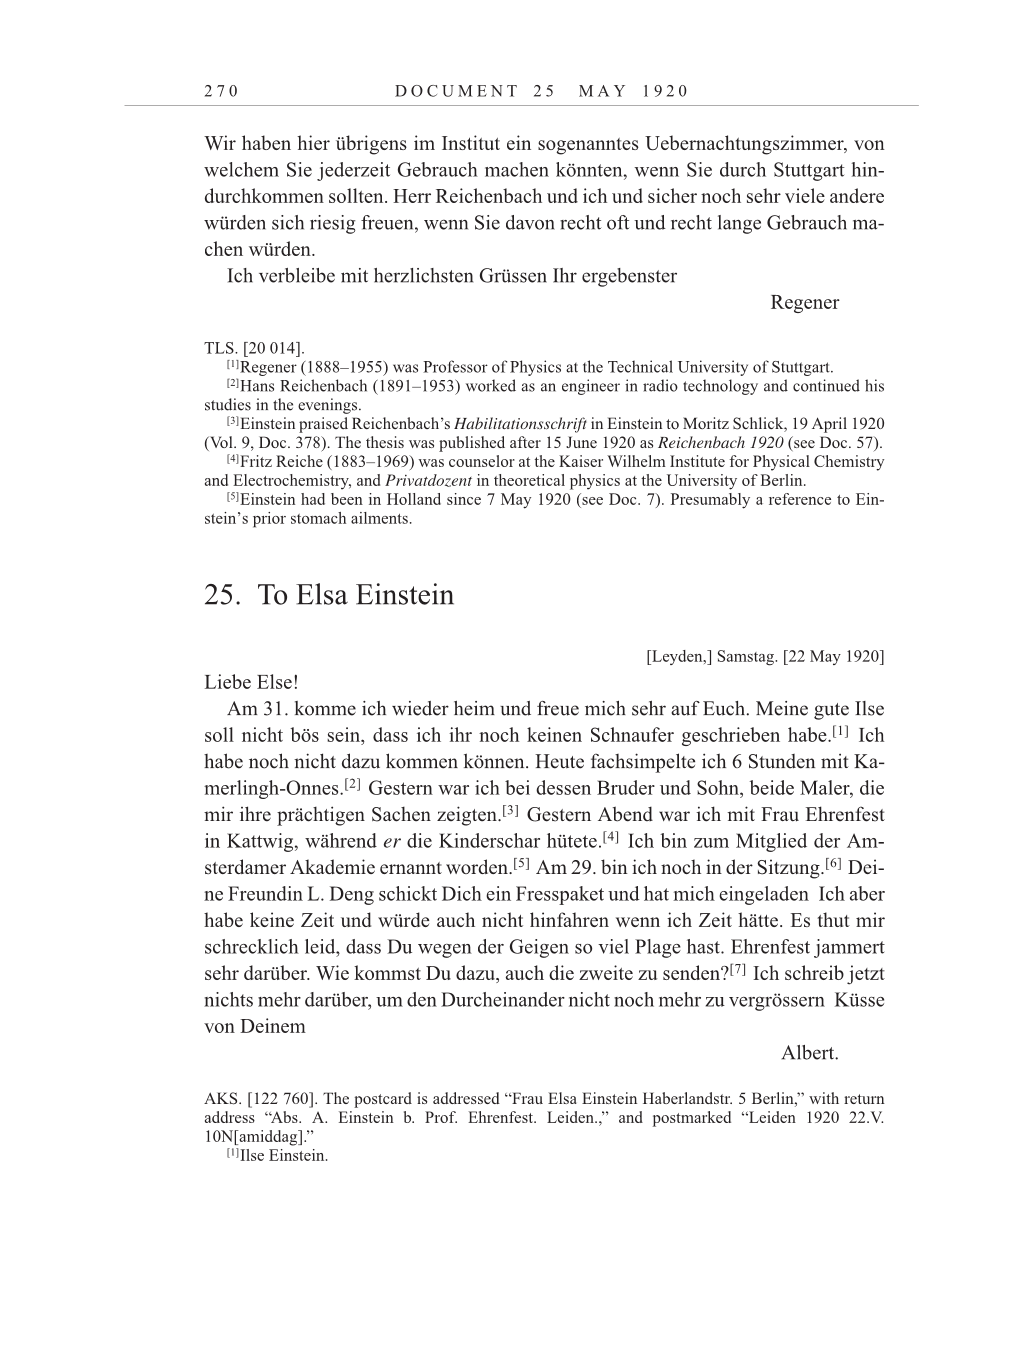 Volume 10: The Berlin Years: Correspondence May-December 1920 / Supplementary Correspondence 1909-1920 page 270